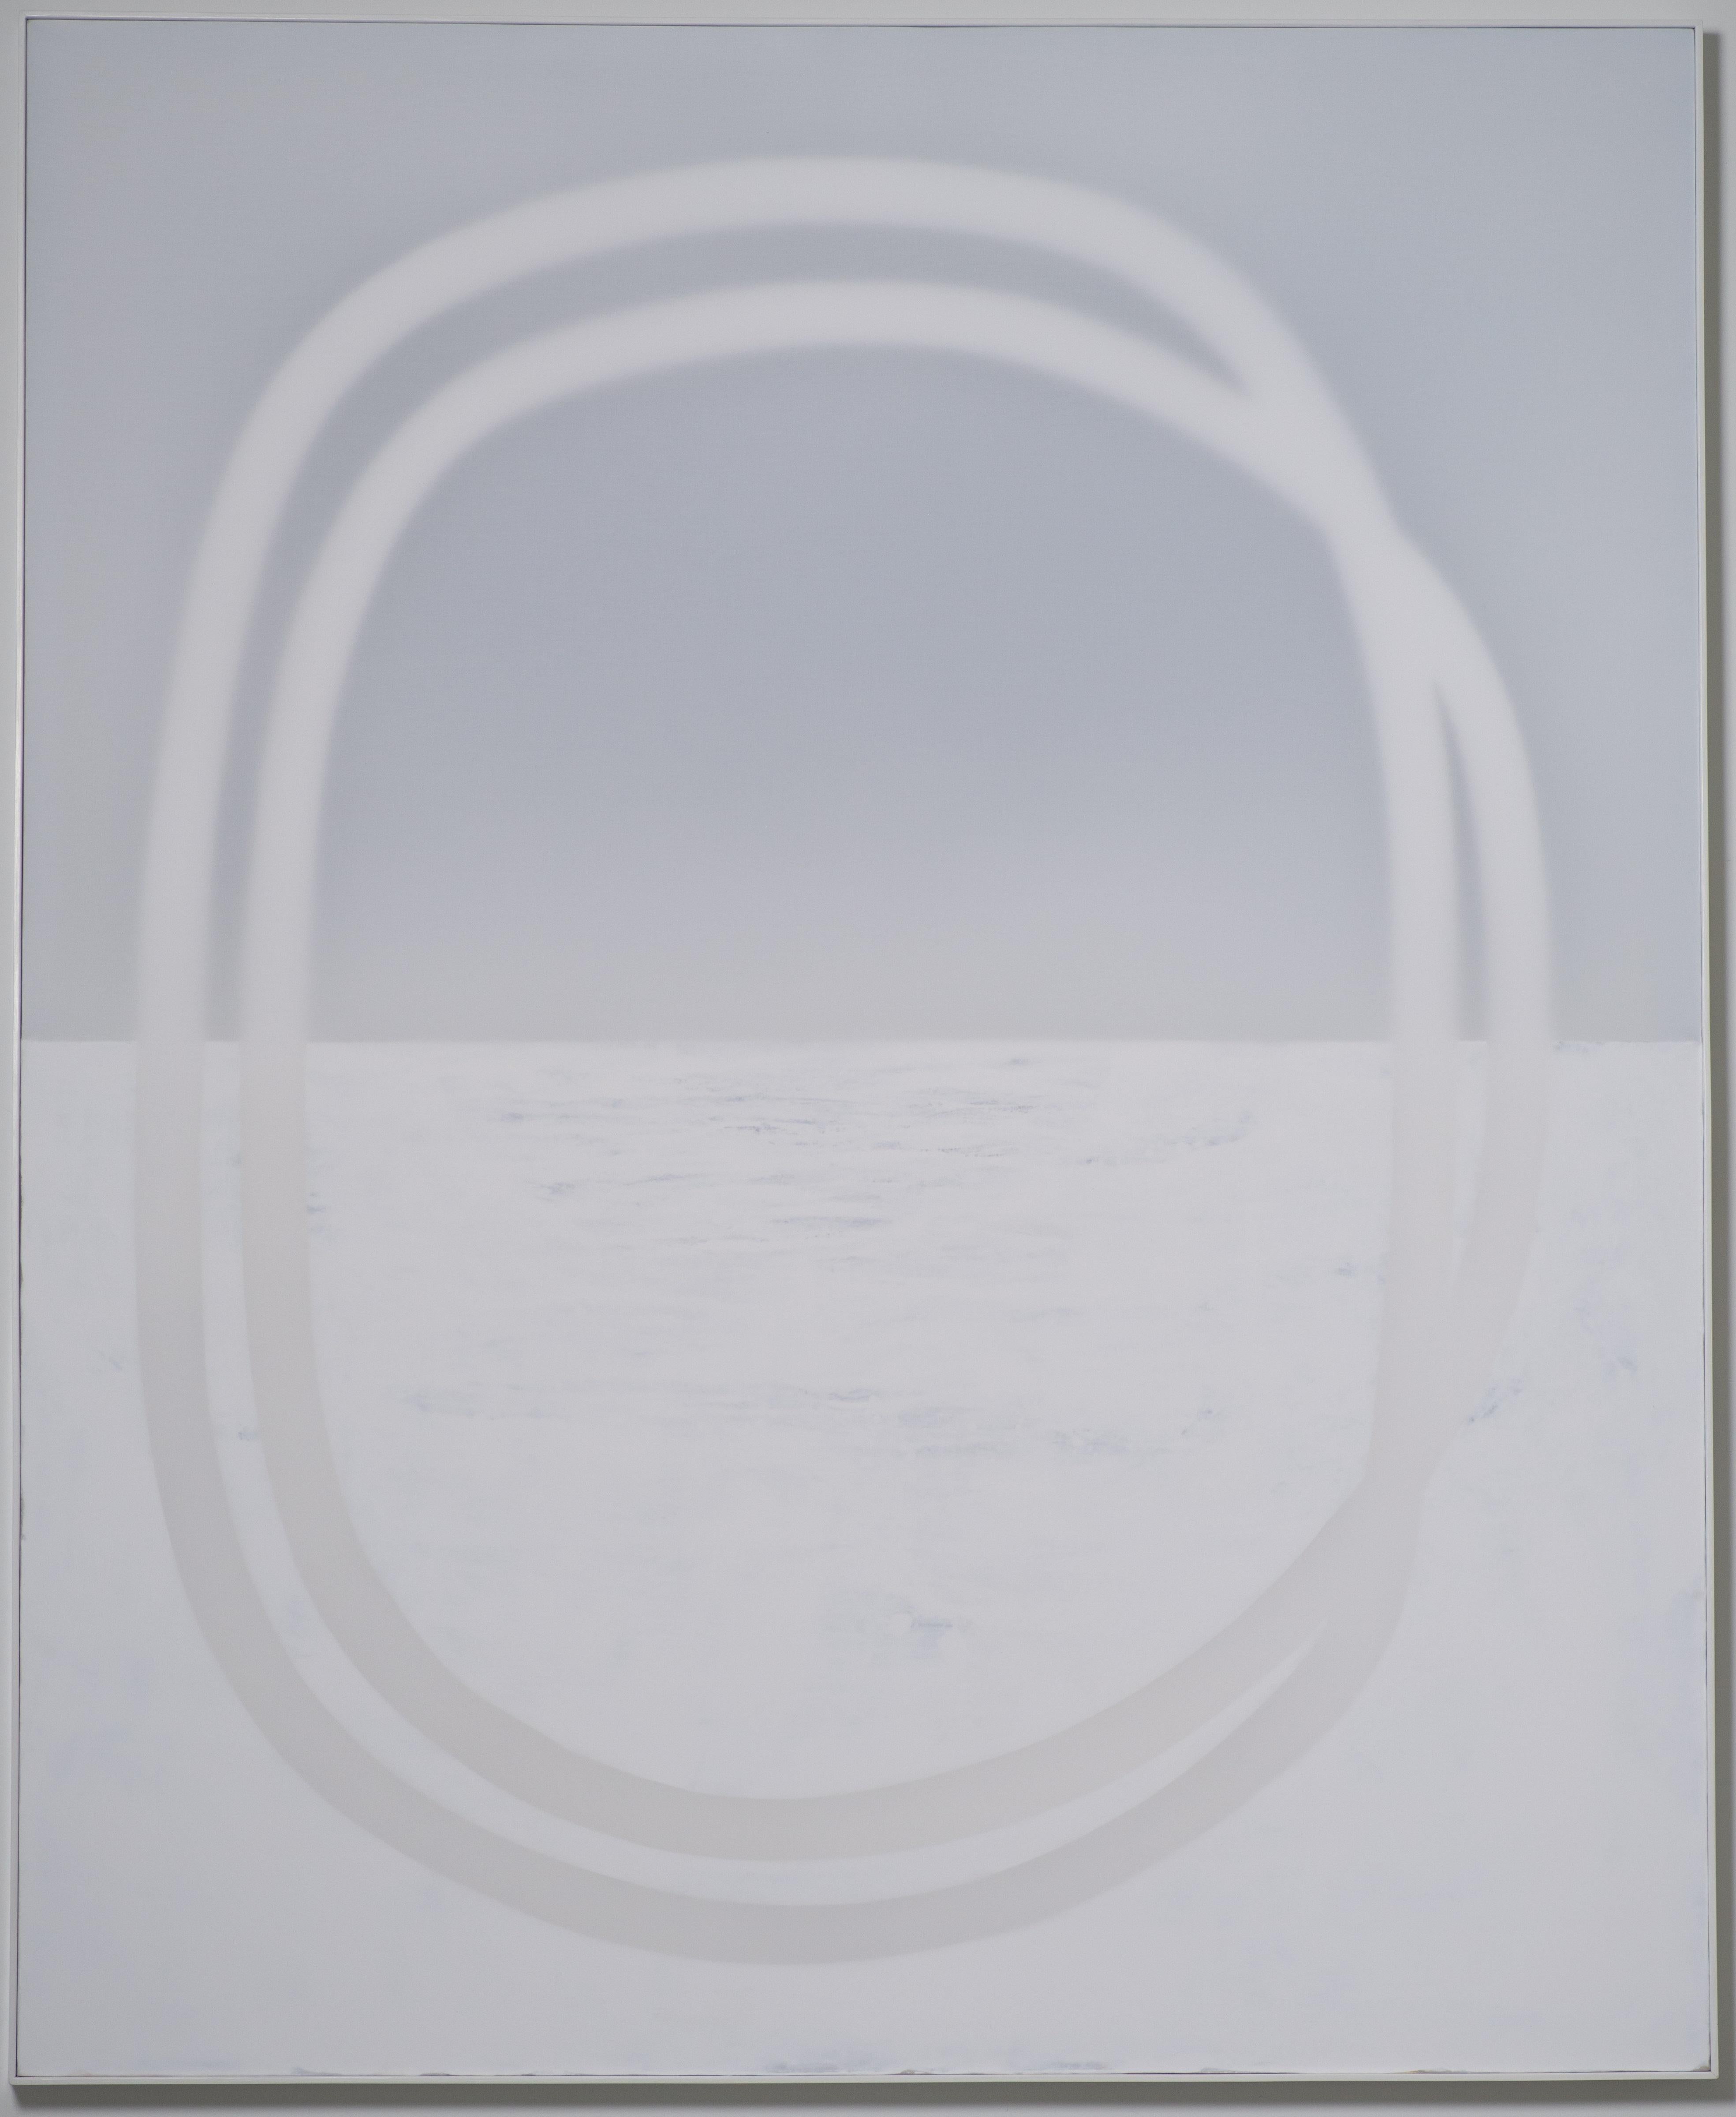 Like the Ocean Like the Sea, 2021
Mixed media on canvas
88 x 72 inches
224 x 183 cm

Udo Nöger creates luminous monochrome paintings that capture light, movement and energy expressed in highly minimalistic compositions. Nöger, who grew up in Enger,